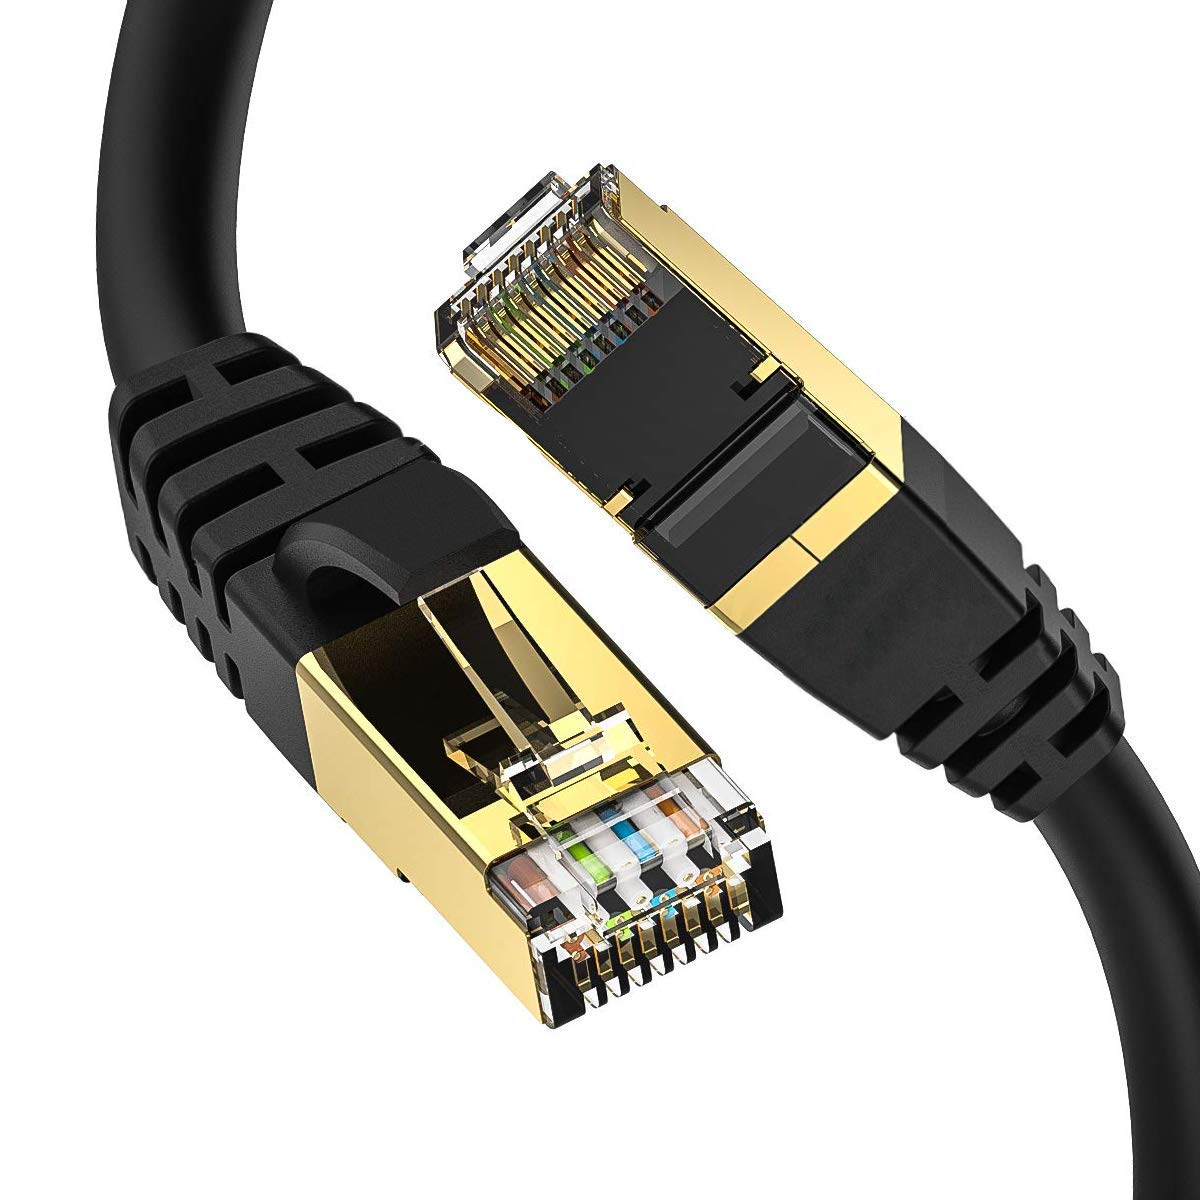 The Professional Best HDMI Cables and DVI Cables | Electric Shop